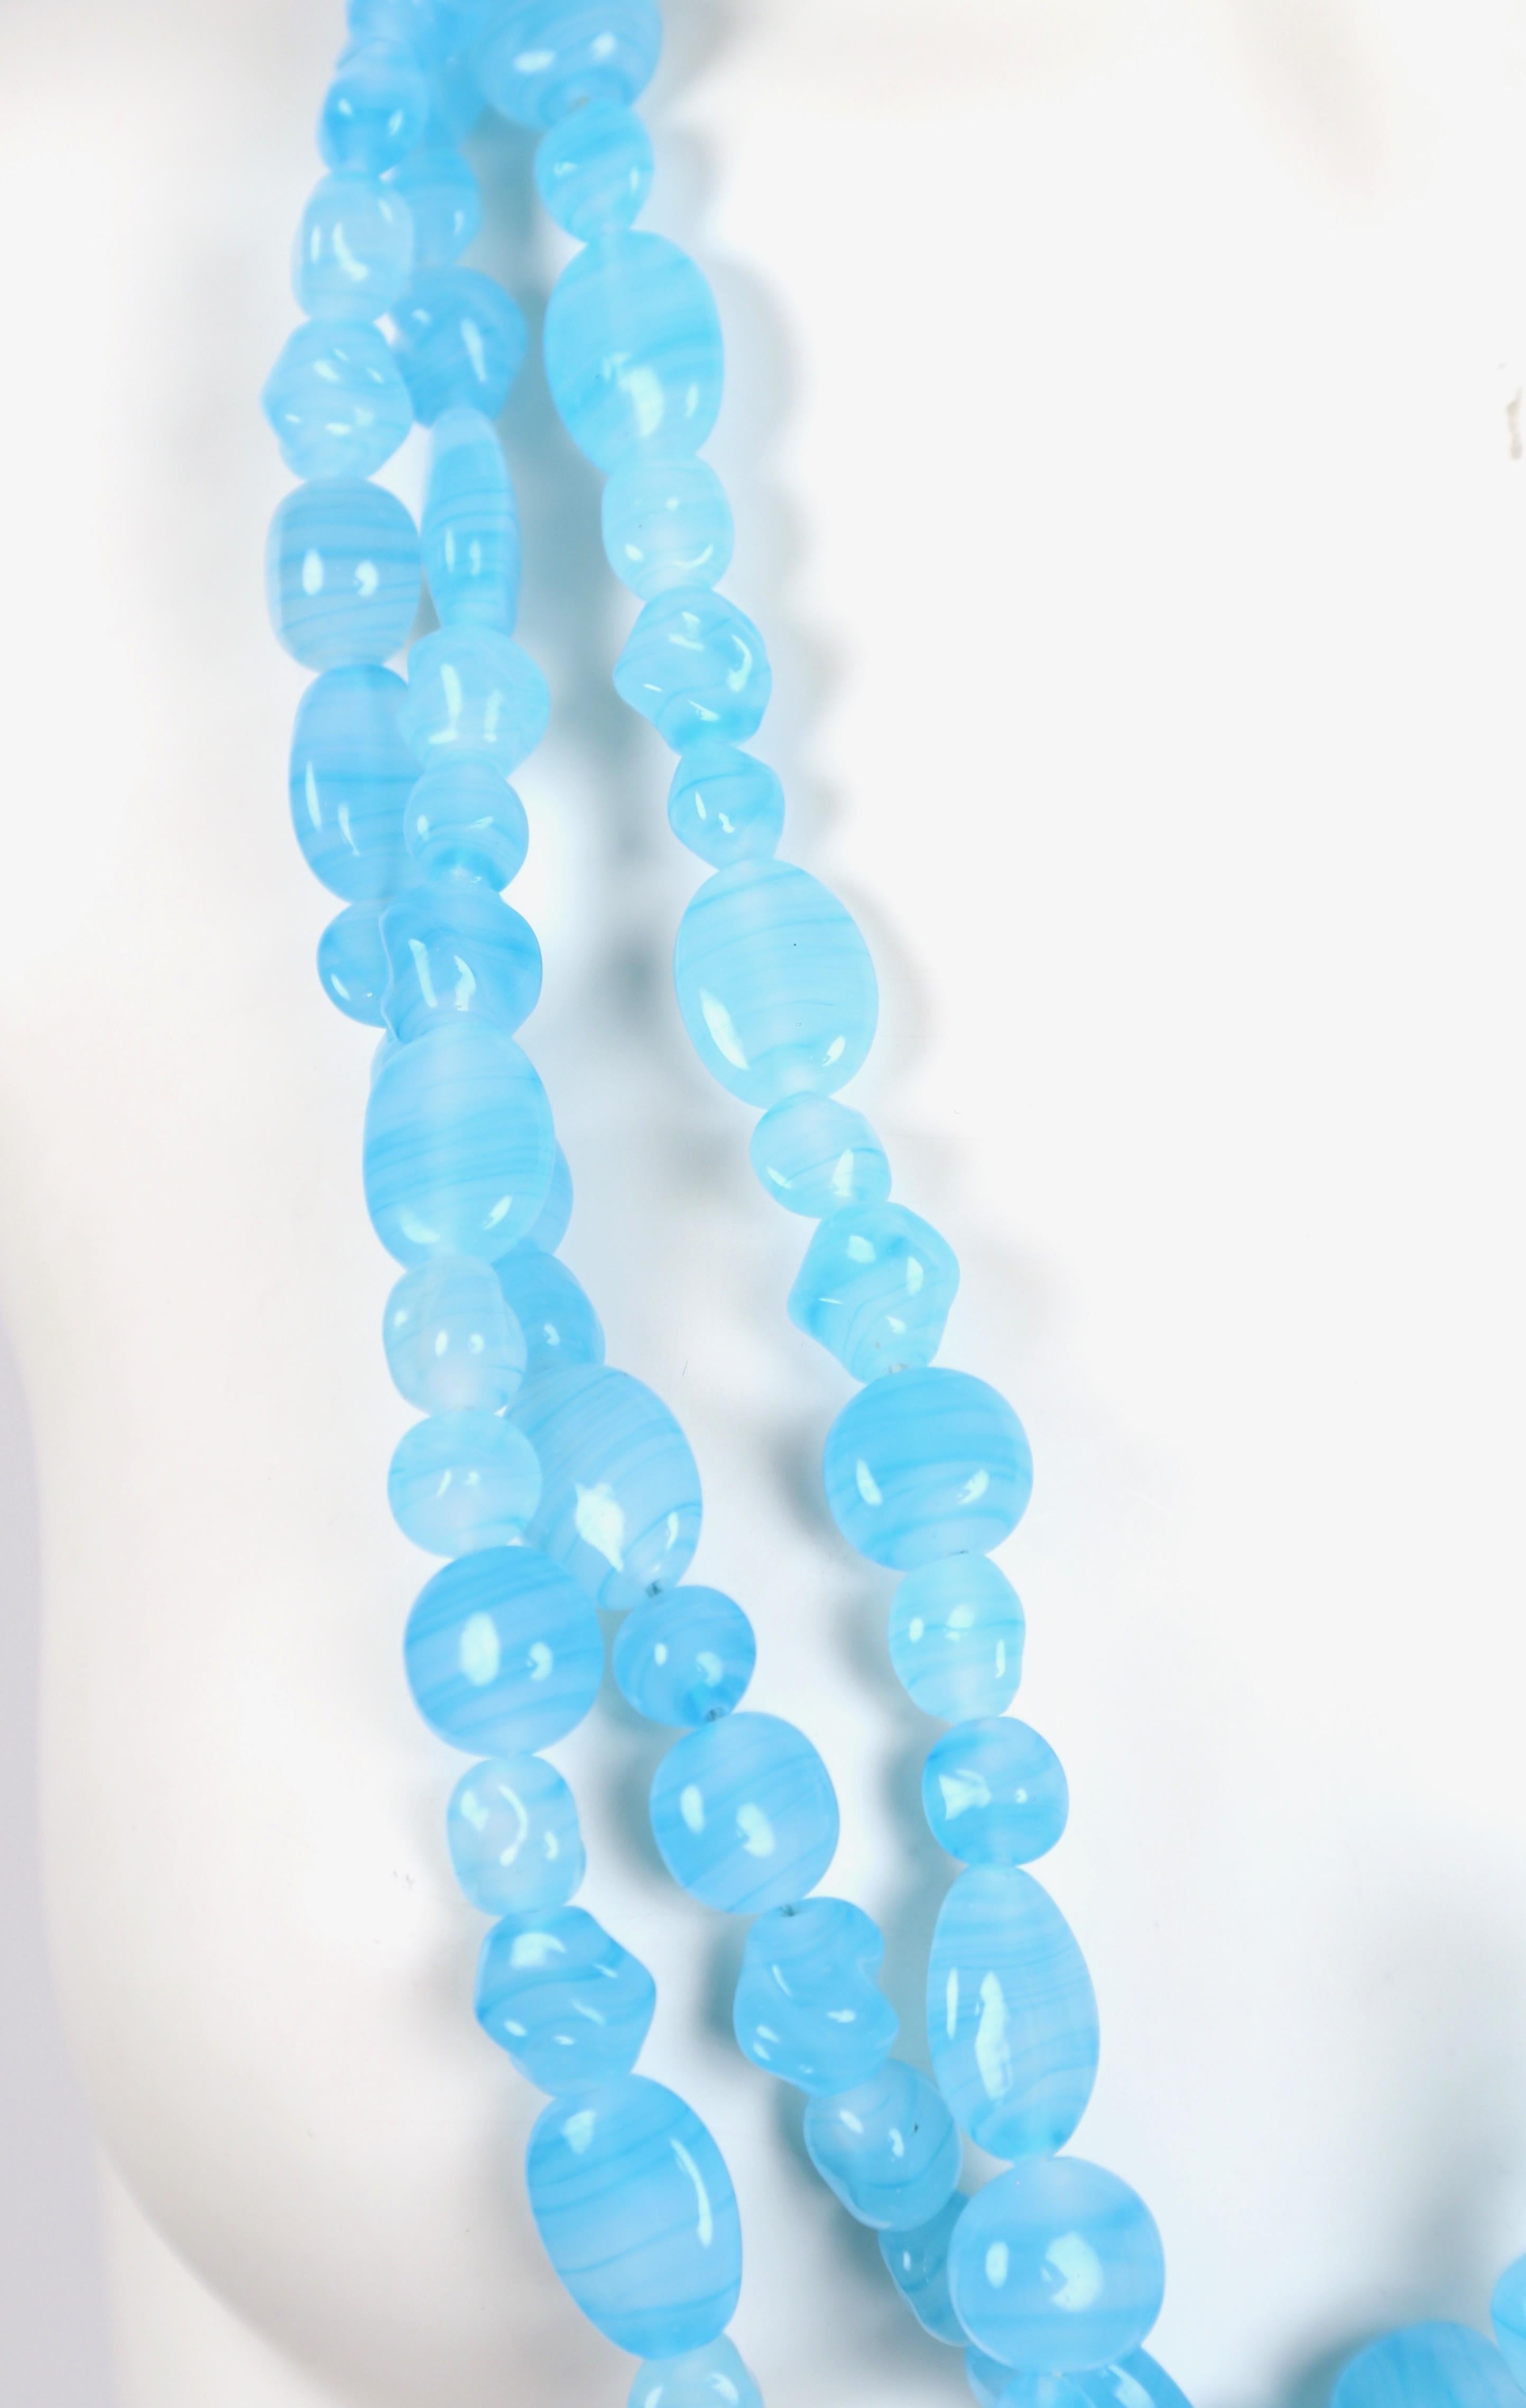 Vivid, blue glass beaded necklace designed by Yohji Yamamoto as worn in one of his few New York runway shows dating the early 2000's. The necklace is unlabeled and measures approximately 34-38